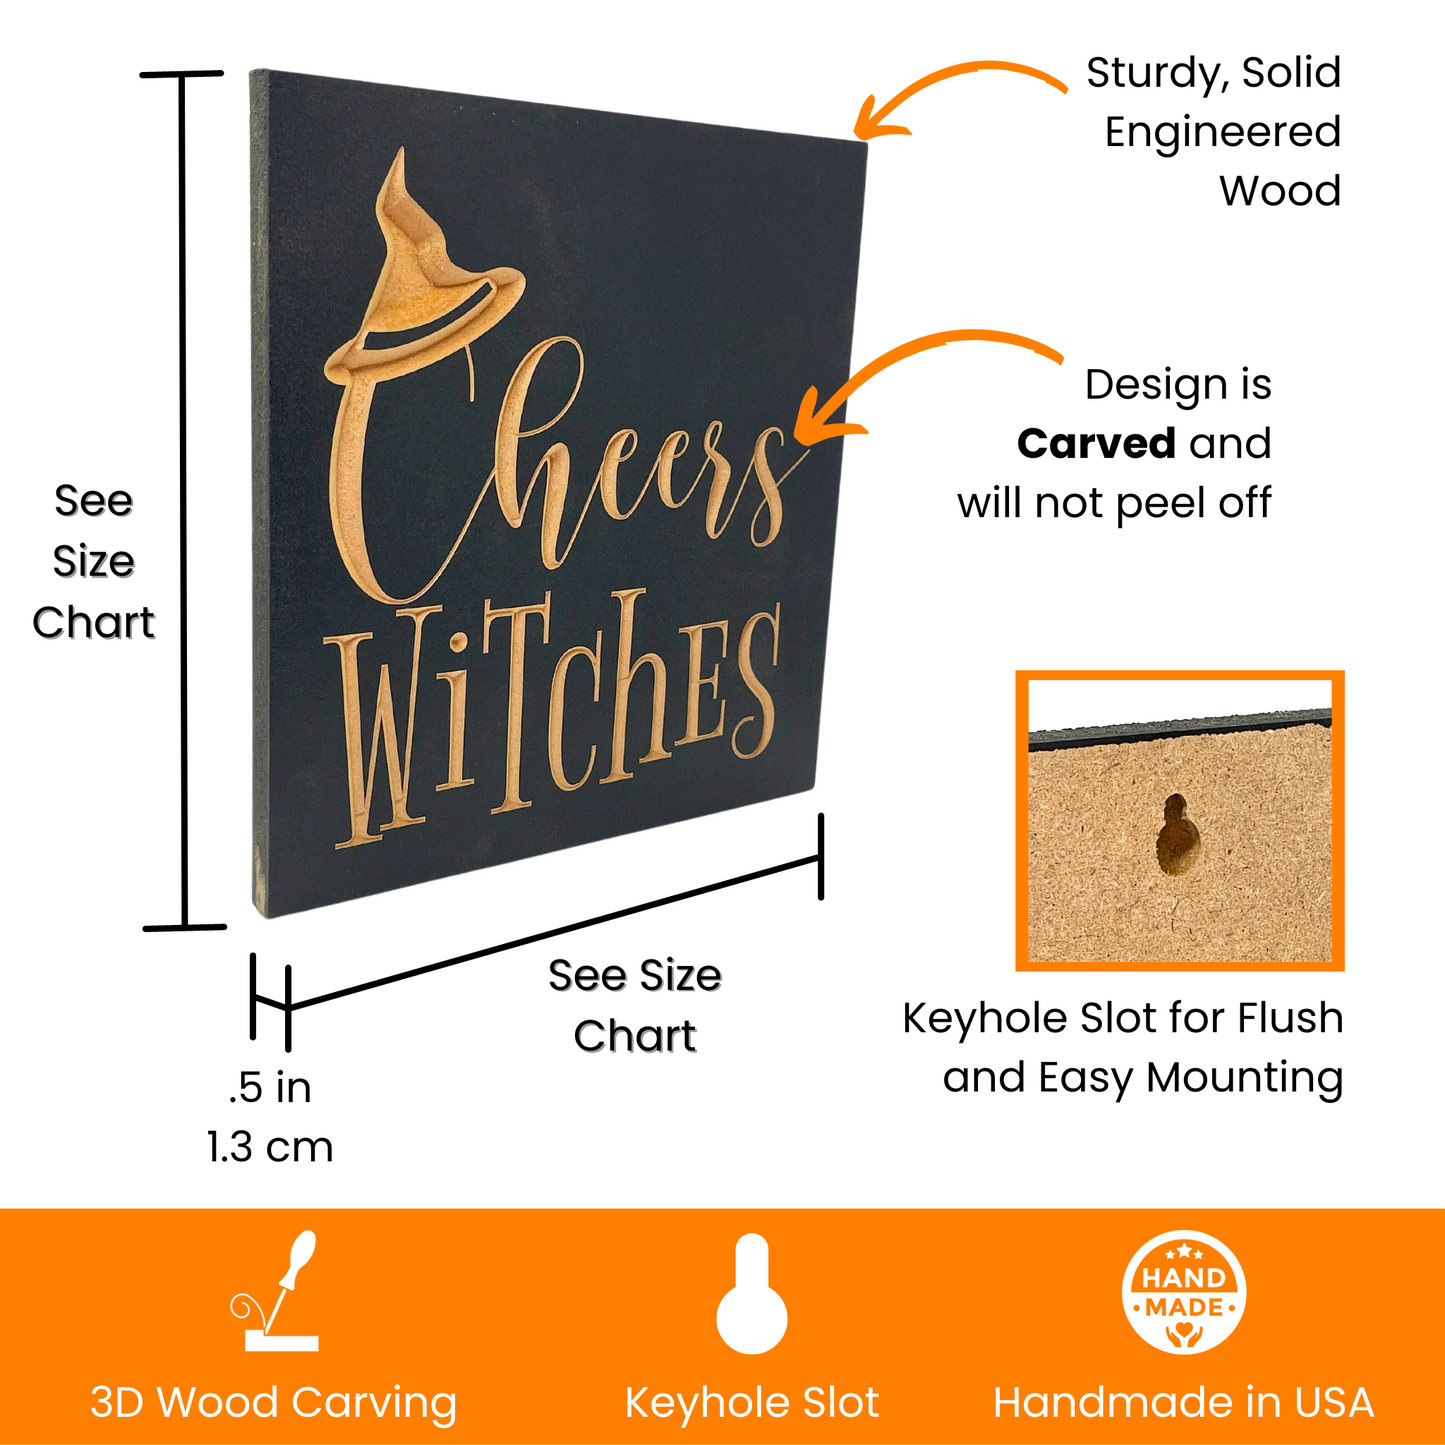 Cheers Witches Carved Wooden Halloween Sign Product Details